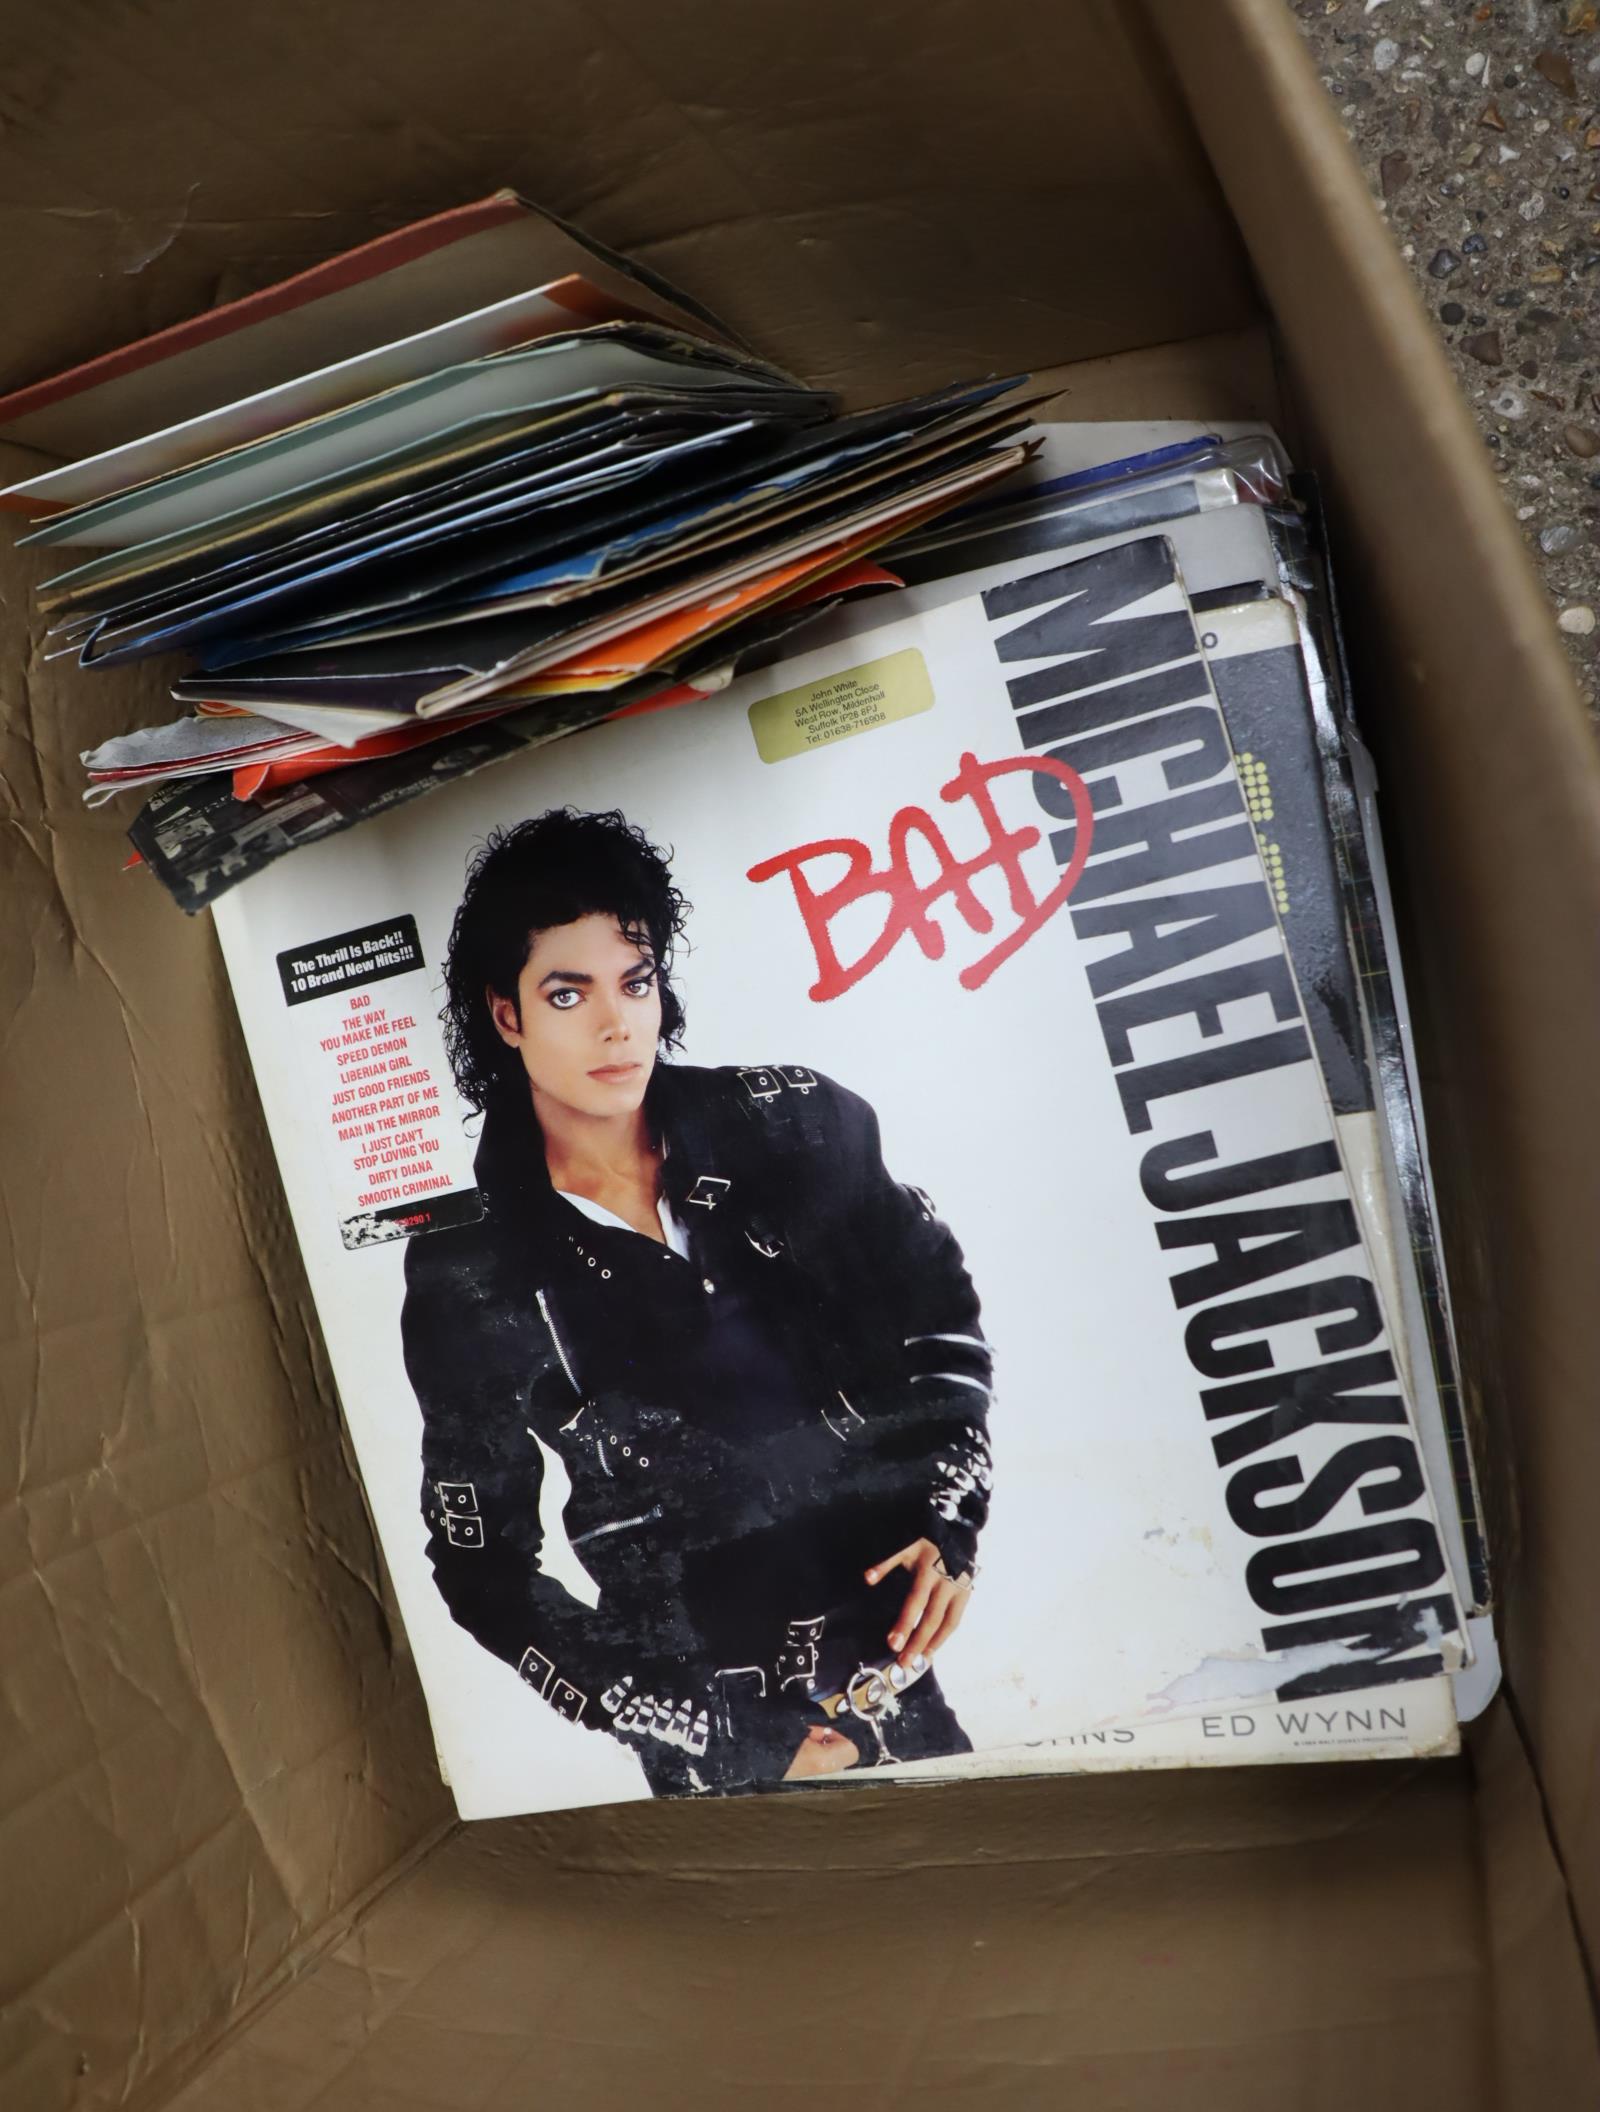 Crate containing vinyl albums and singles incl. Michael Jackson's Bad, Motor Head, etc.